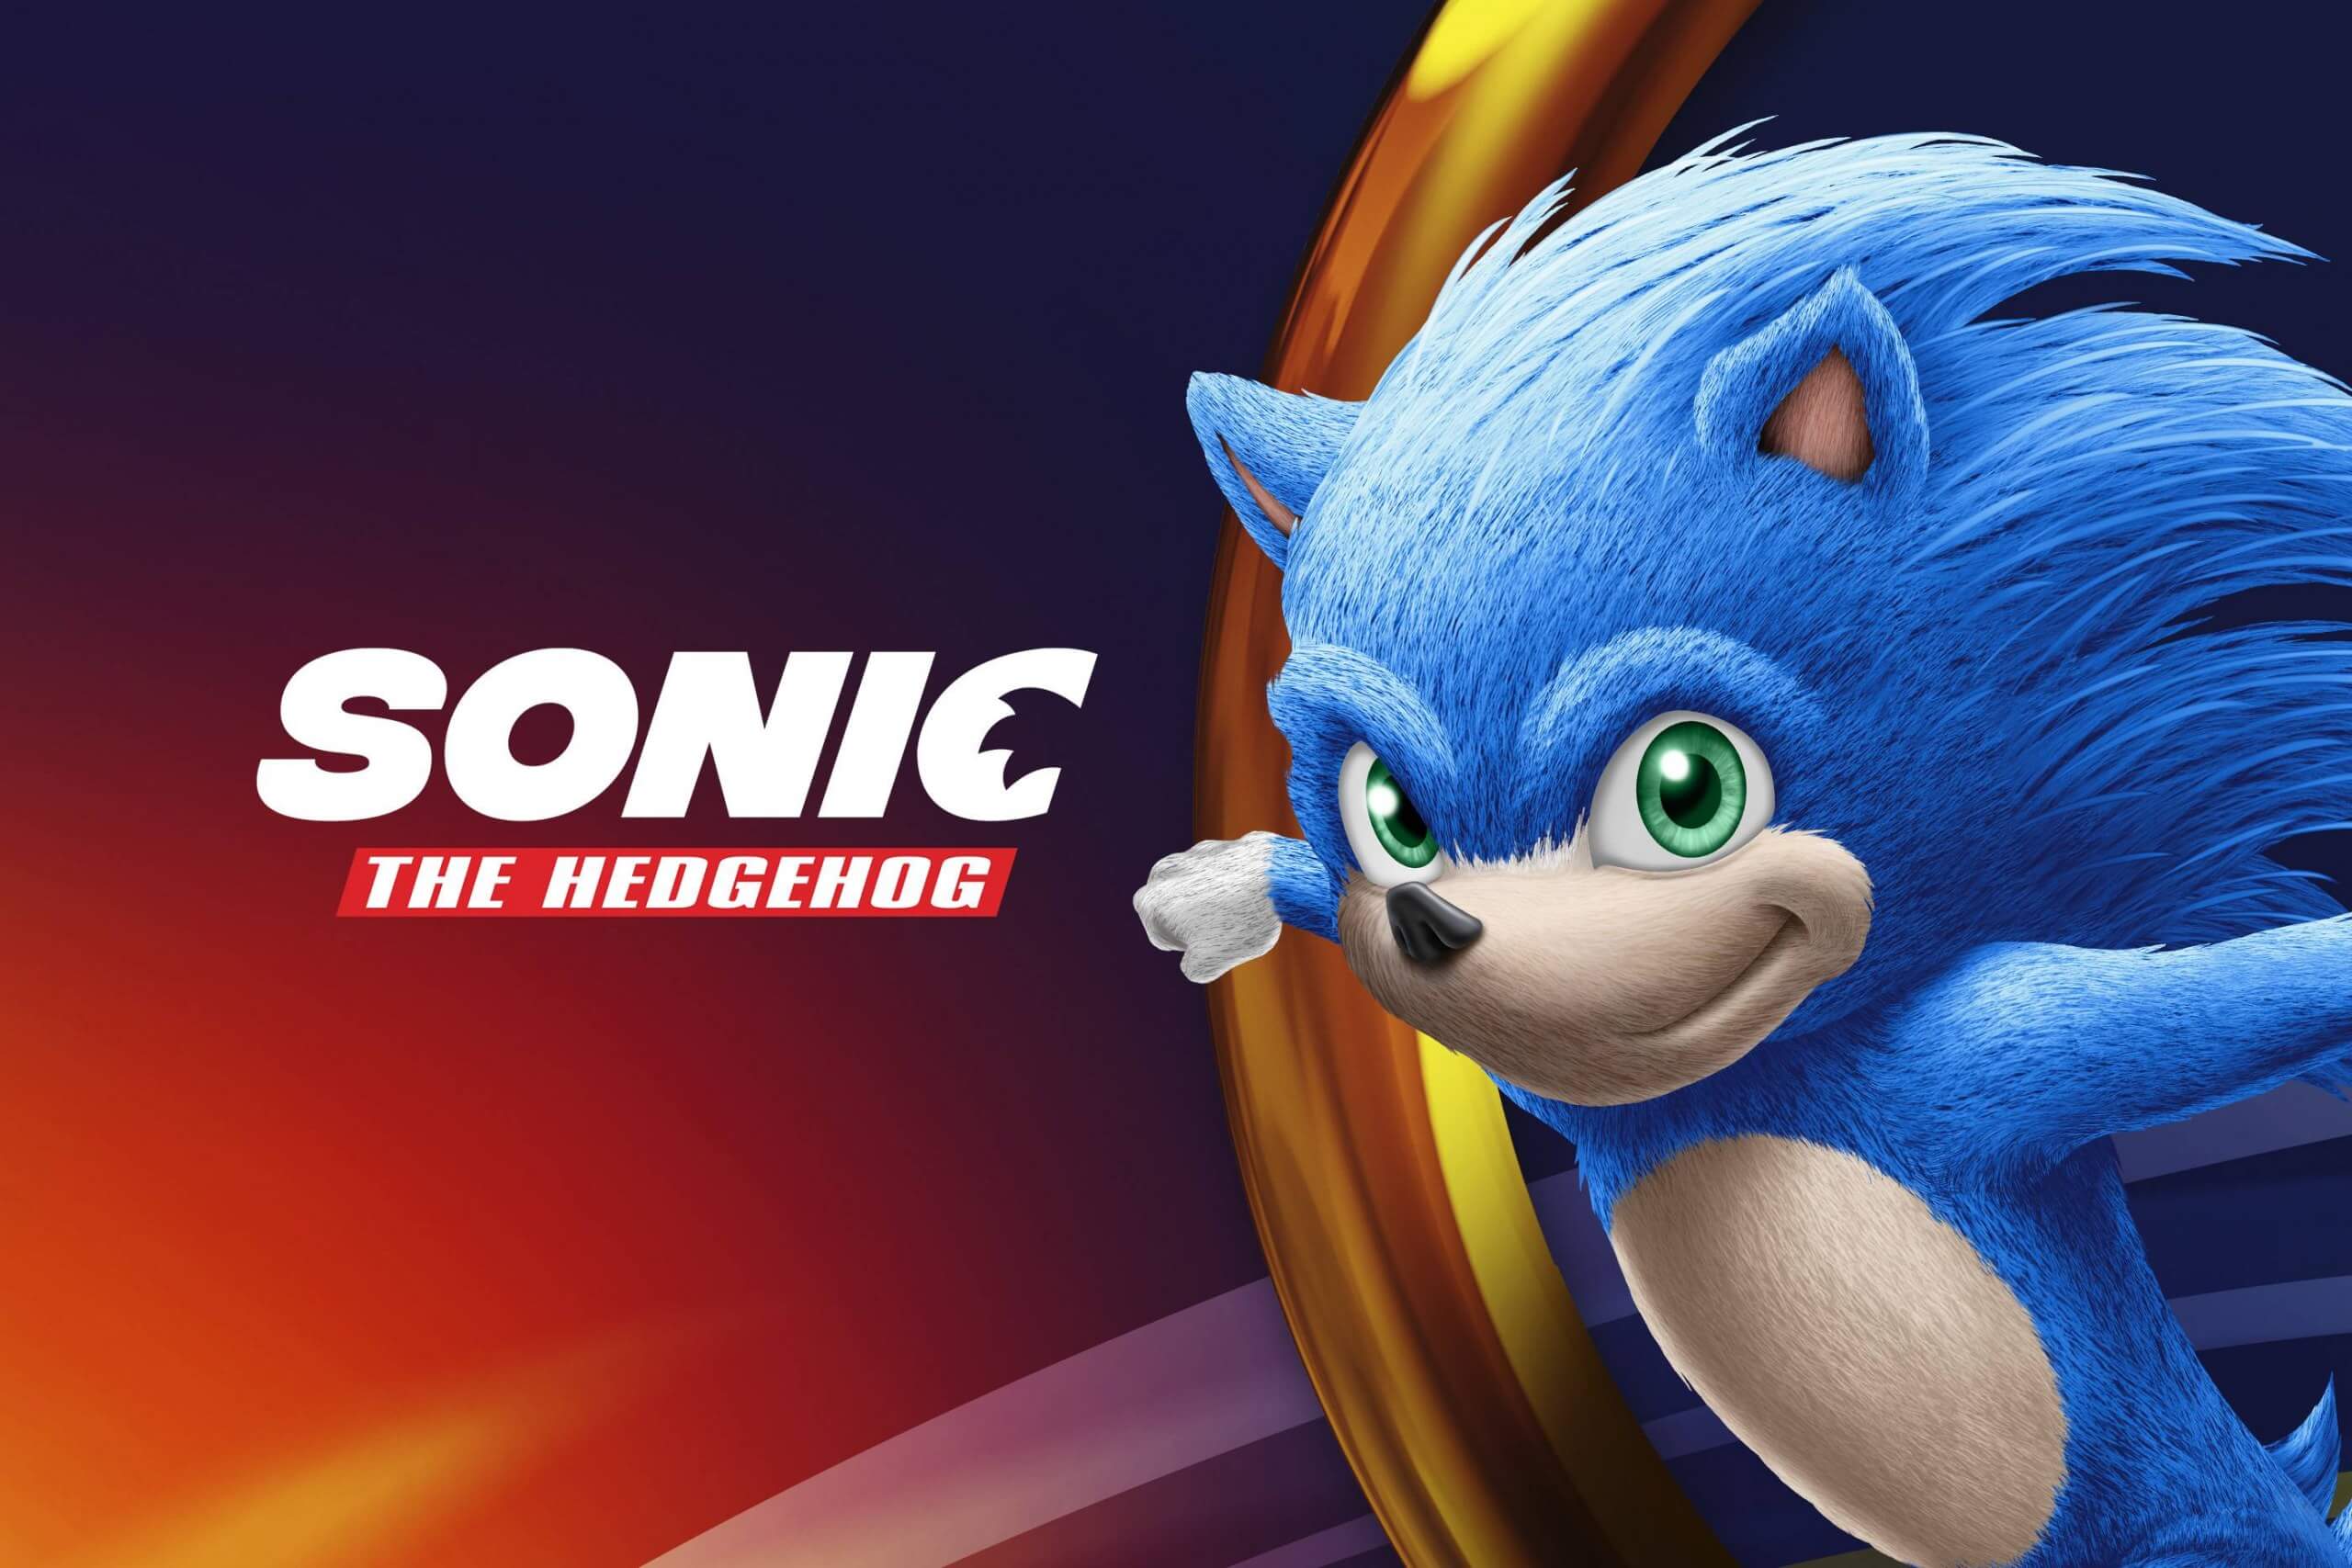 Check out the weird, movie version of Sonic the Hedgehog